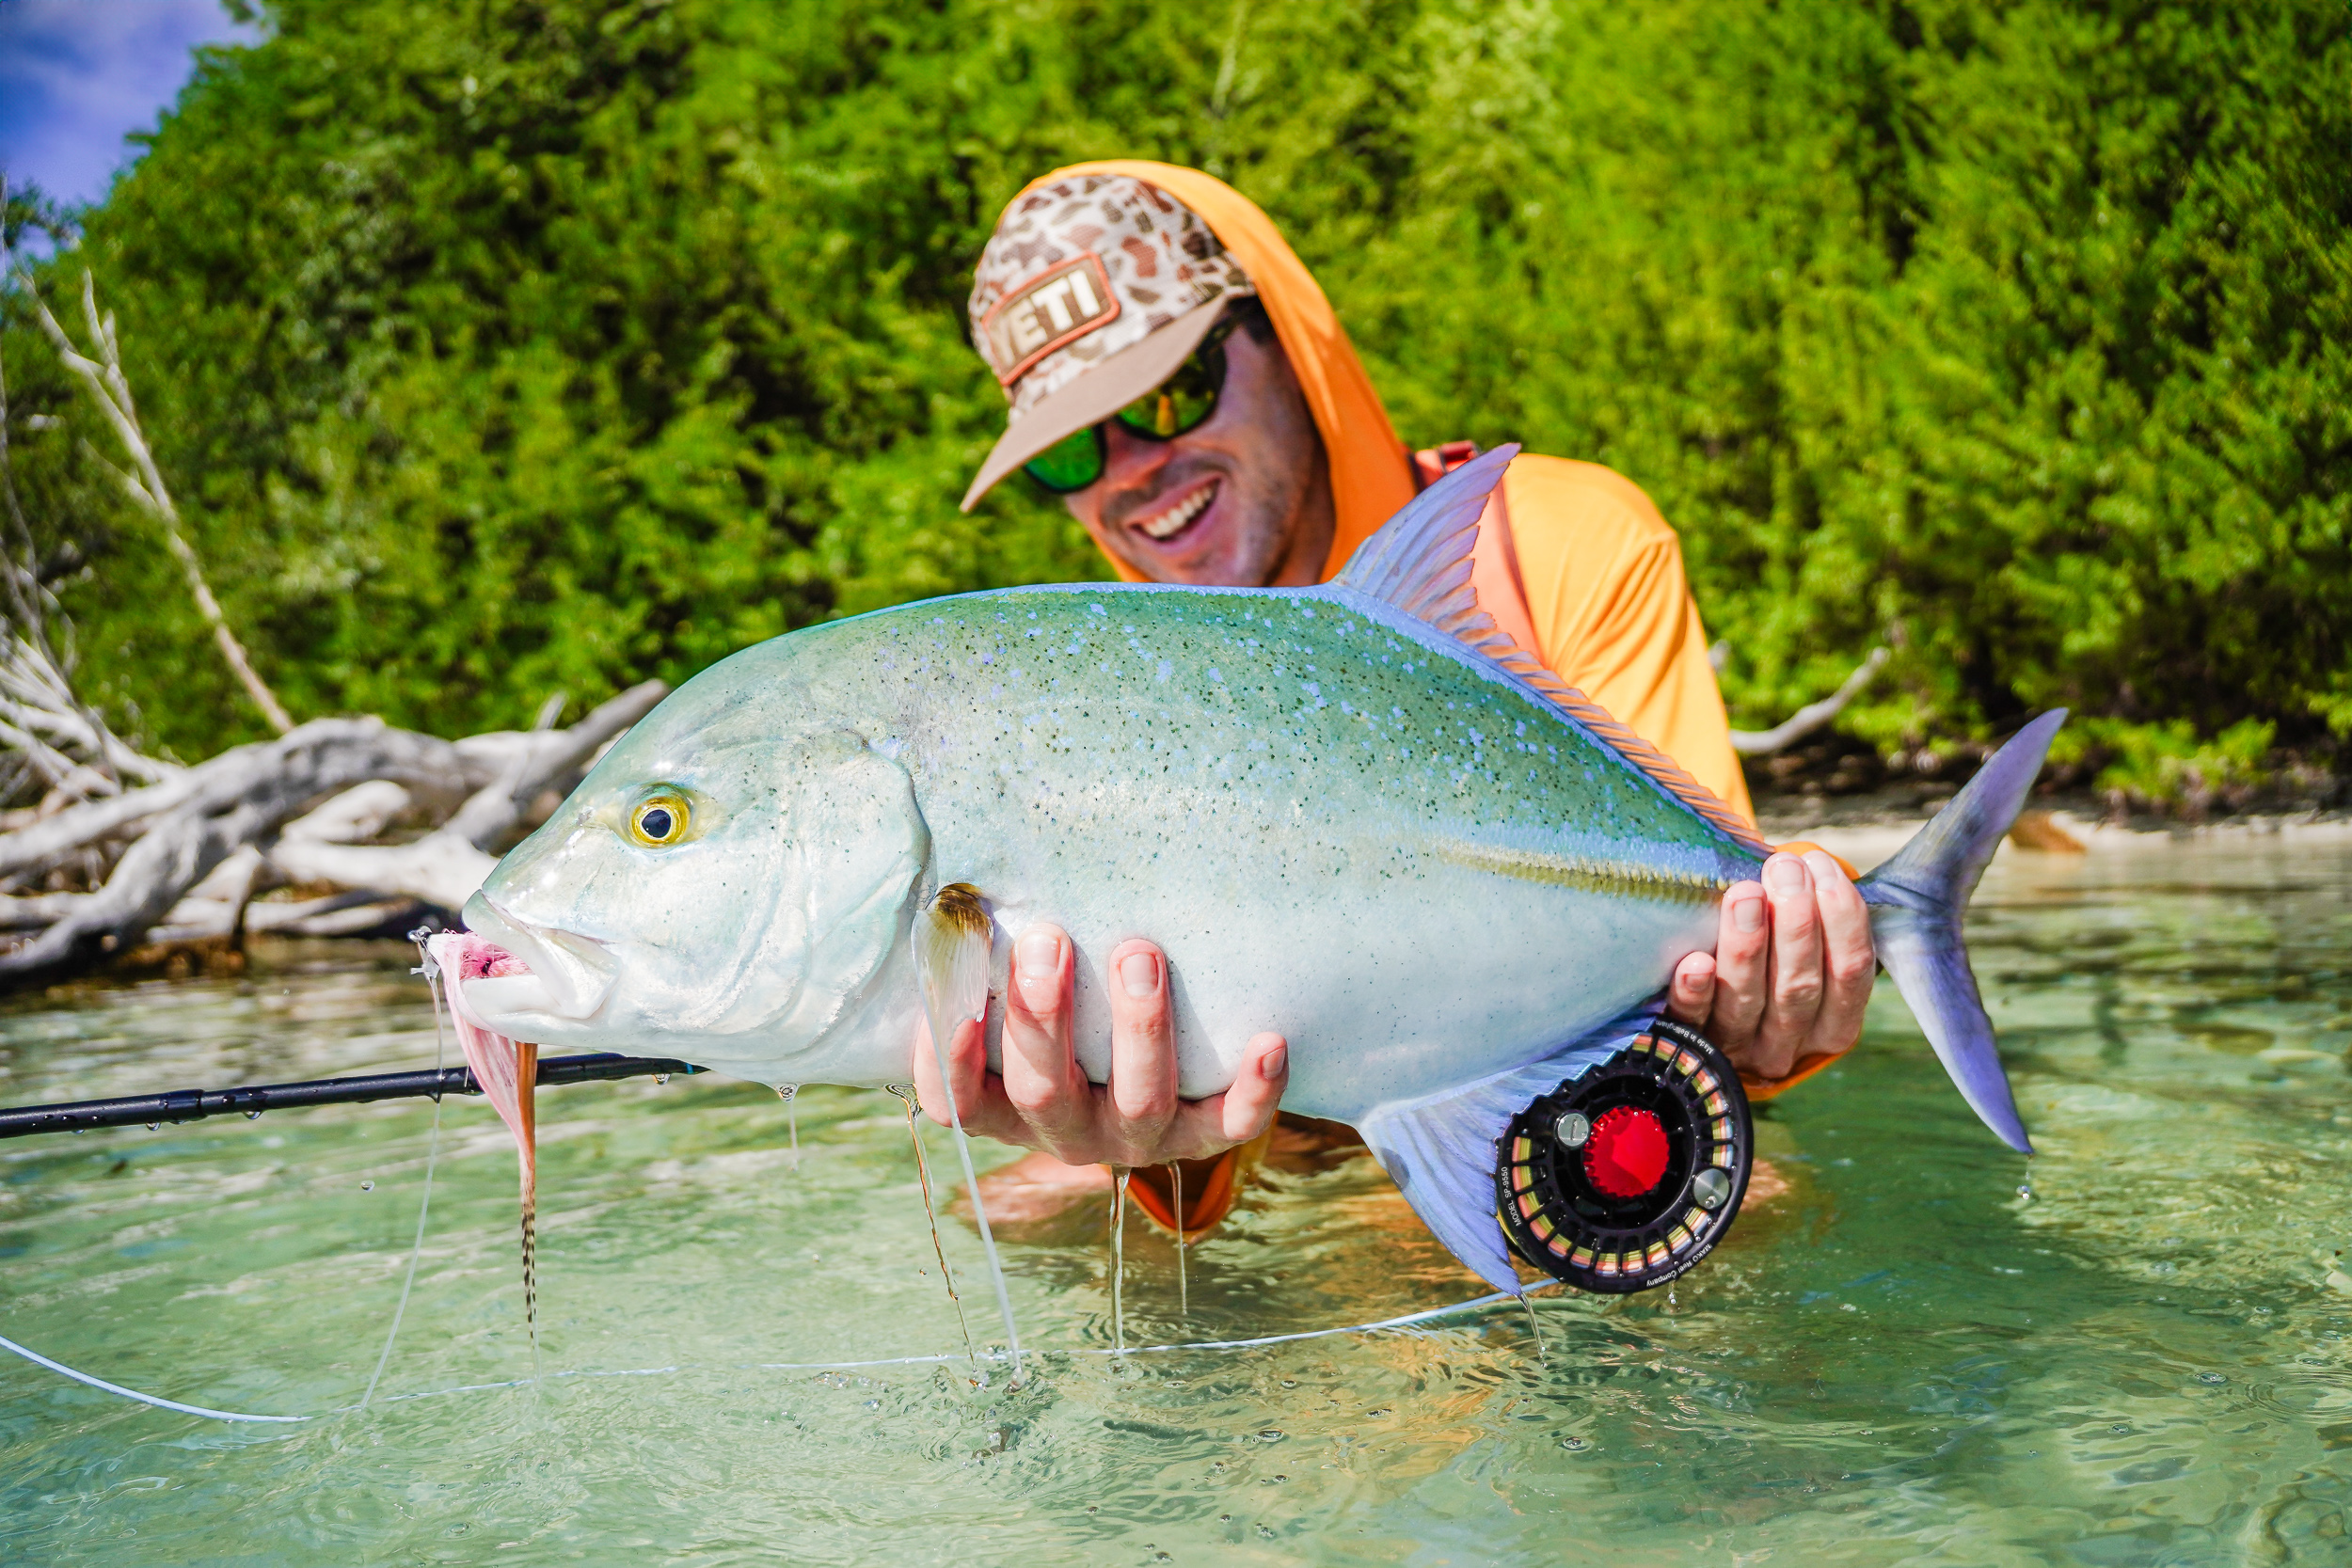 Fly Fishing Bluefin Trevally - The Catch, Facts, Flies, Rods & More